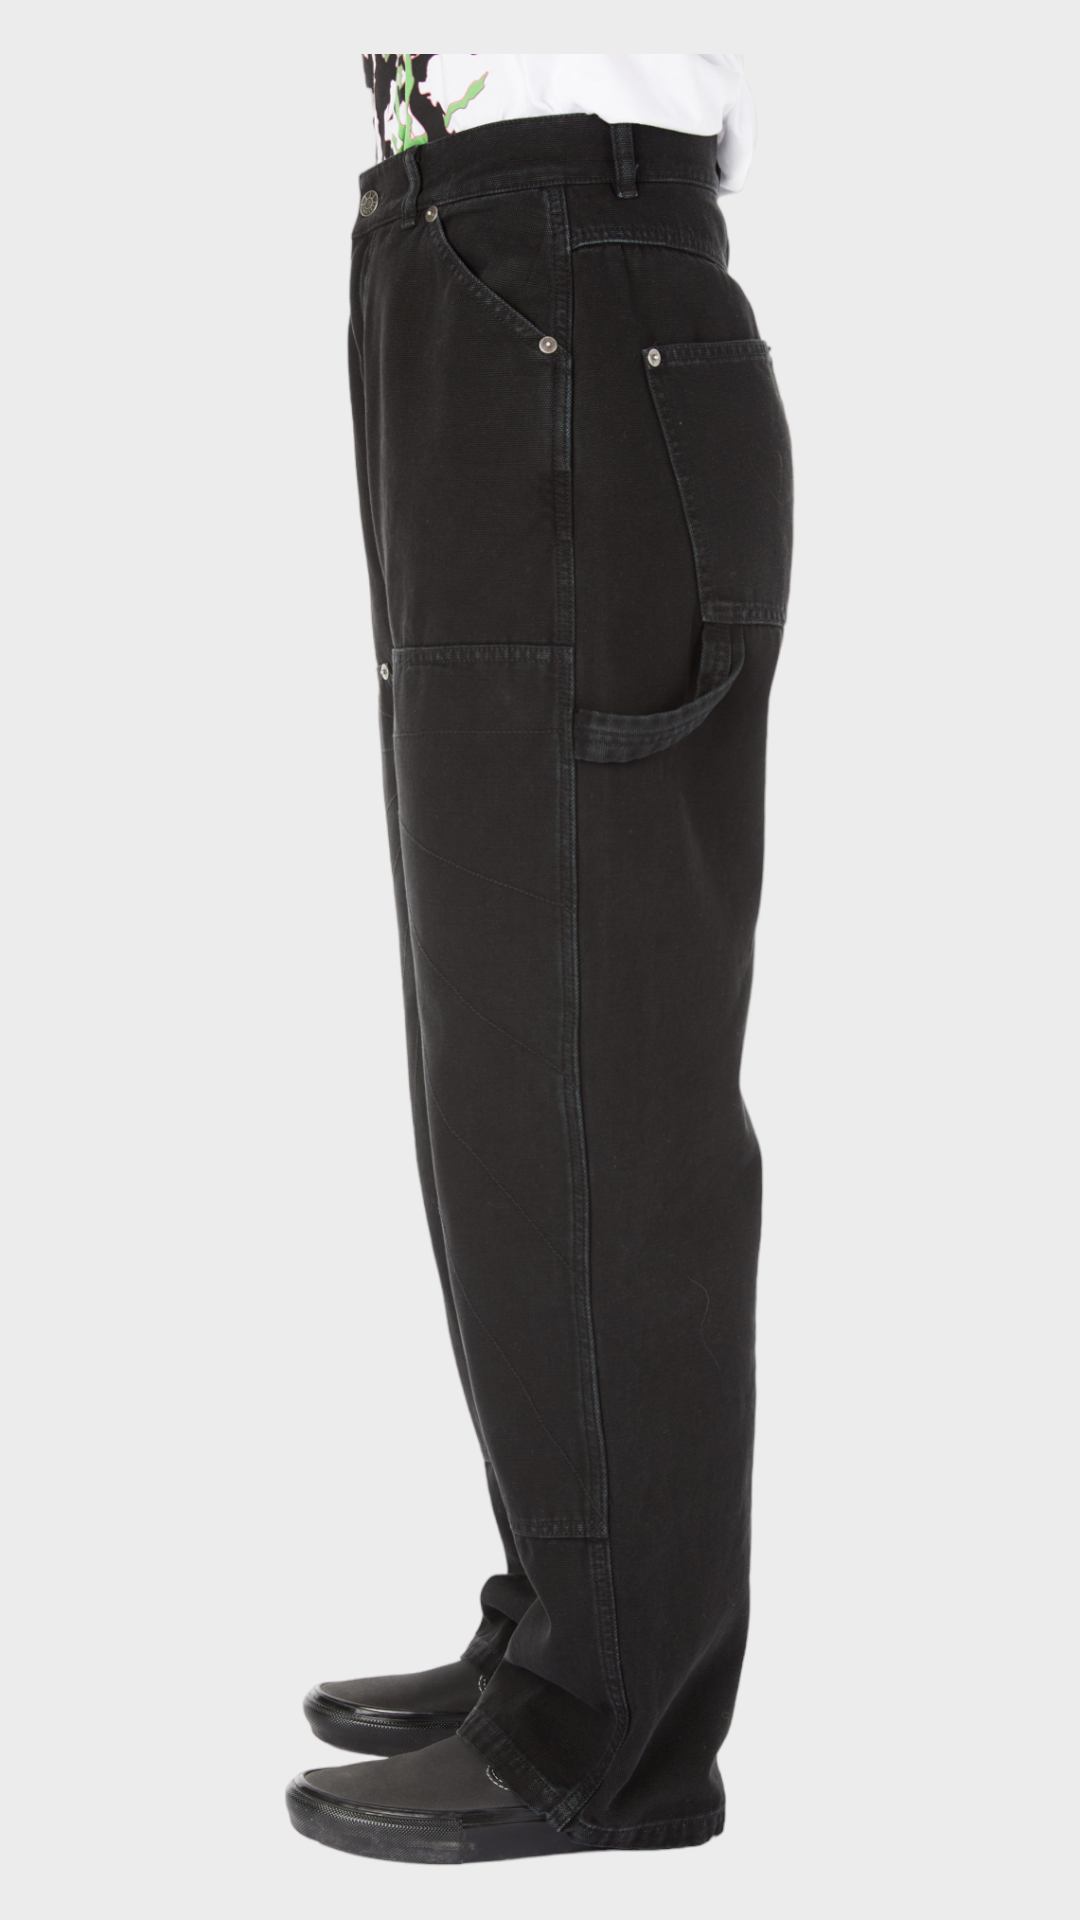 The New Light 2 Knee Canvas Trouser